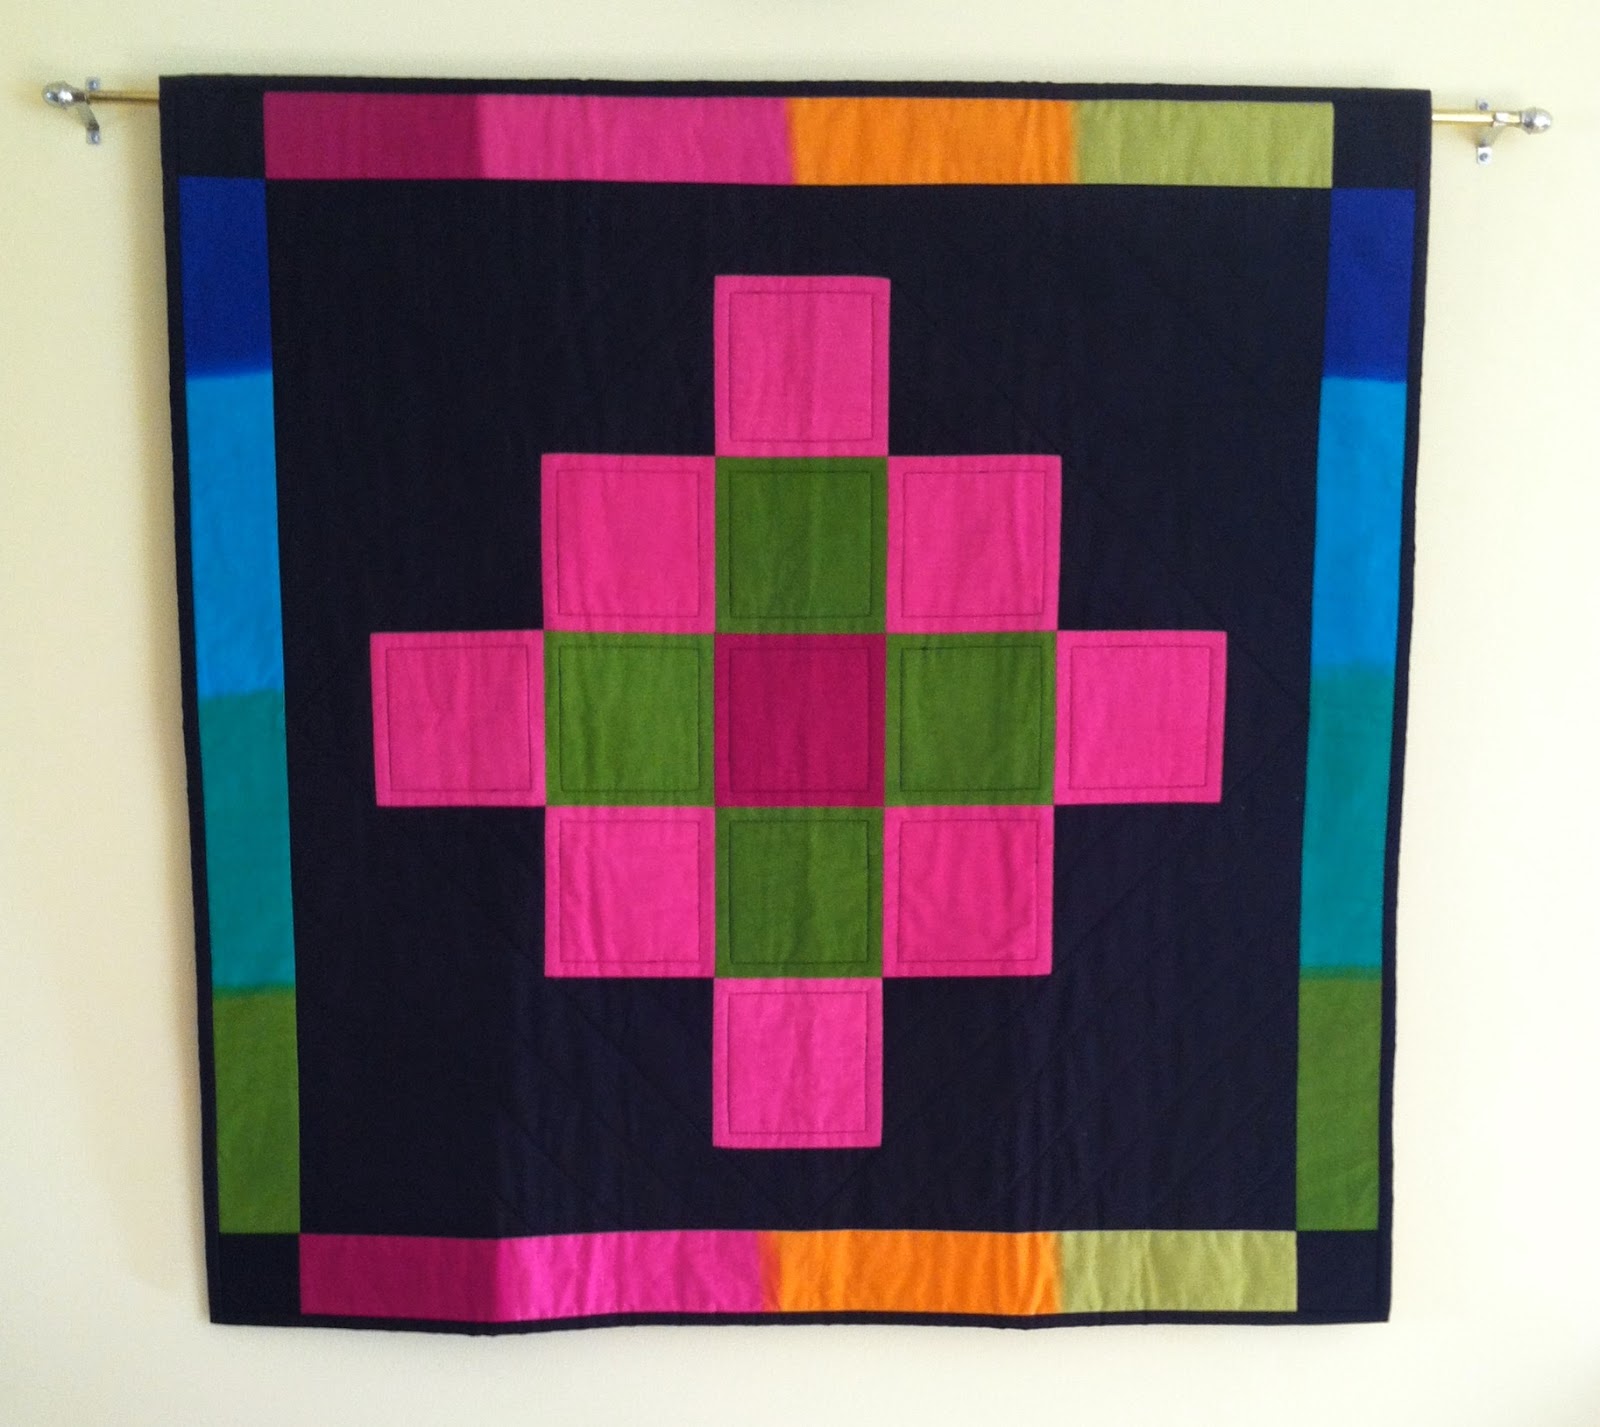 Amish Looking Quilt - Reversible too! I love the colors!